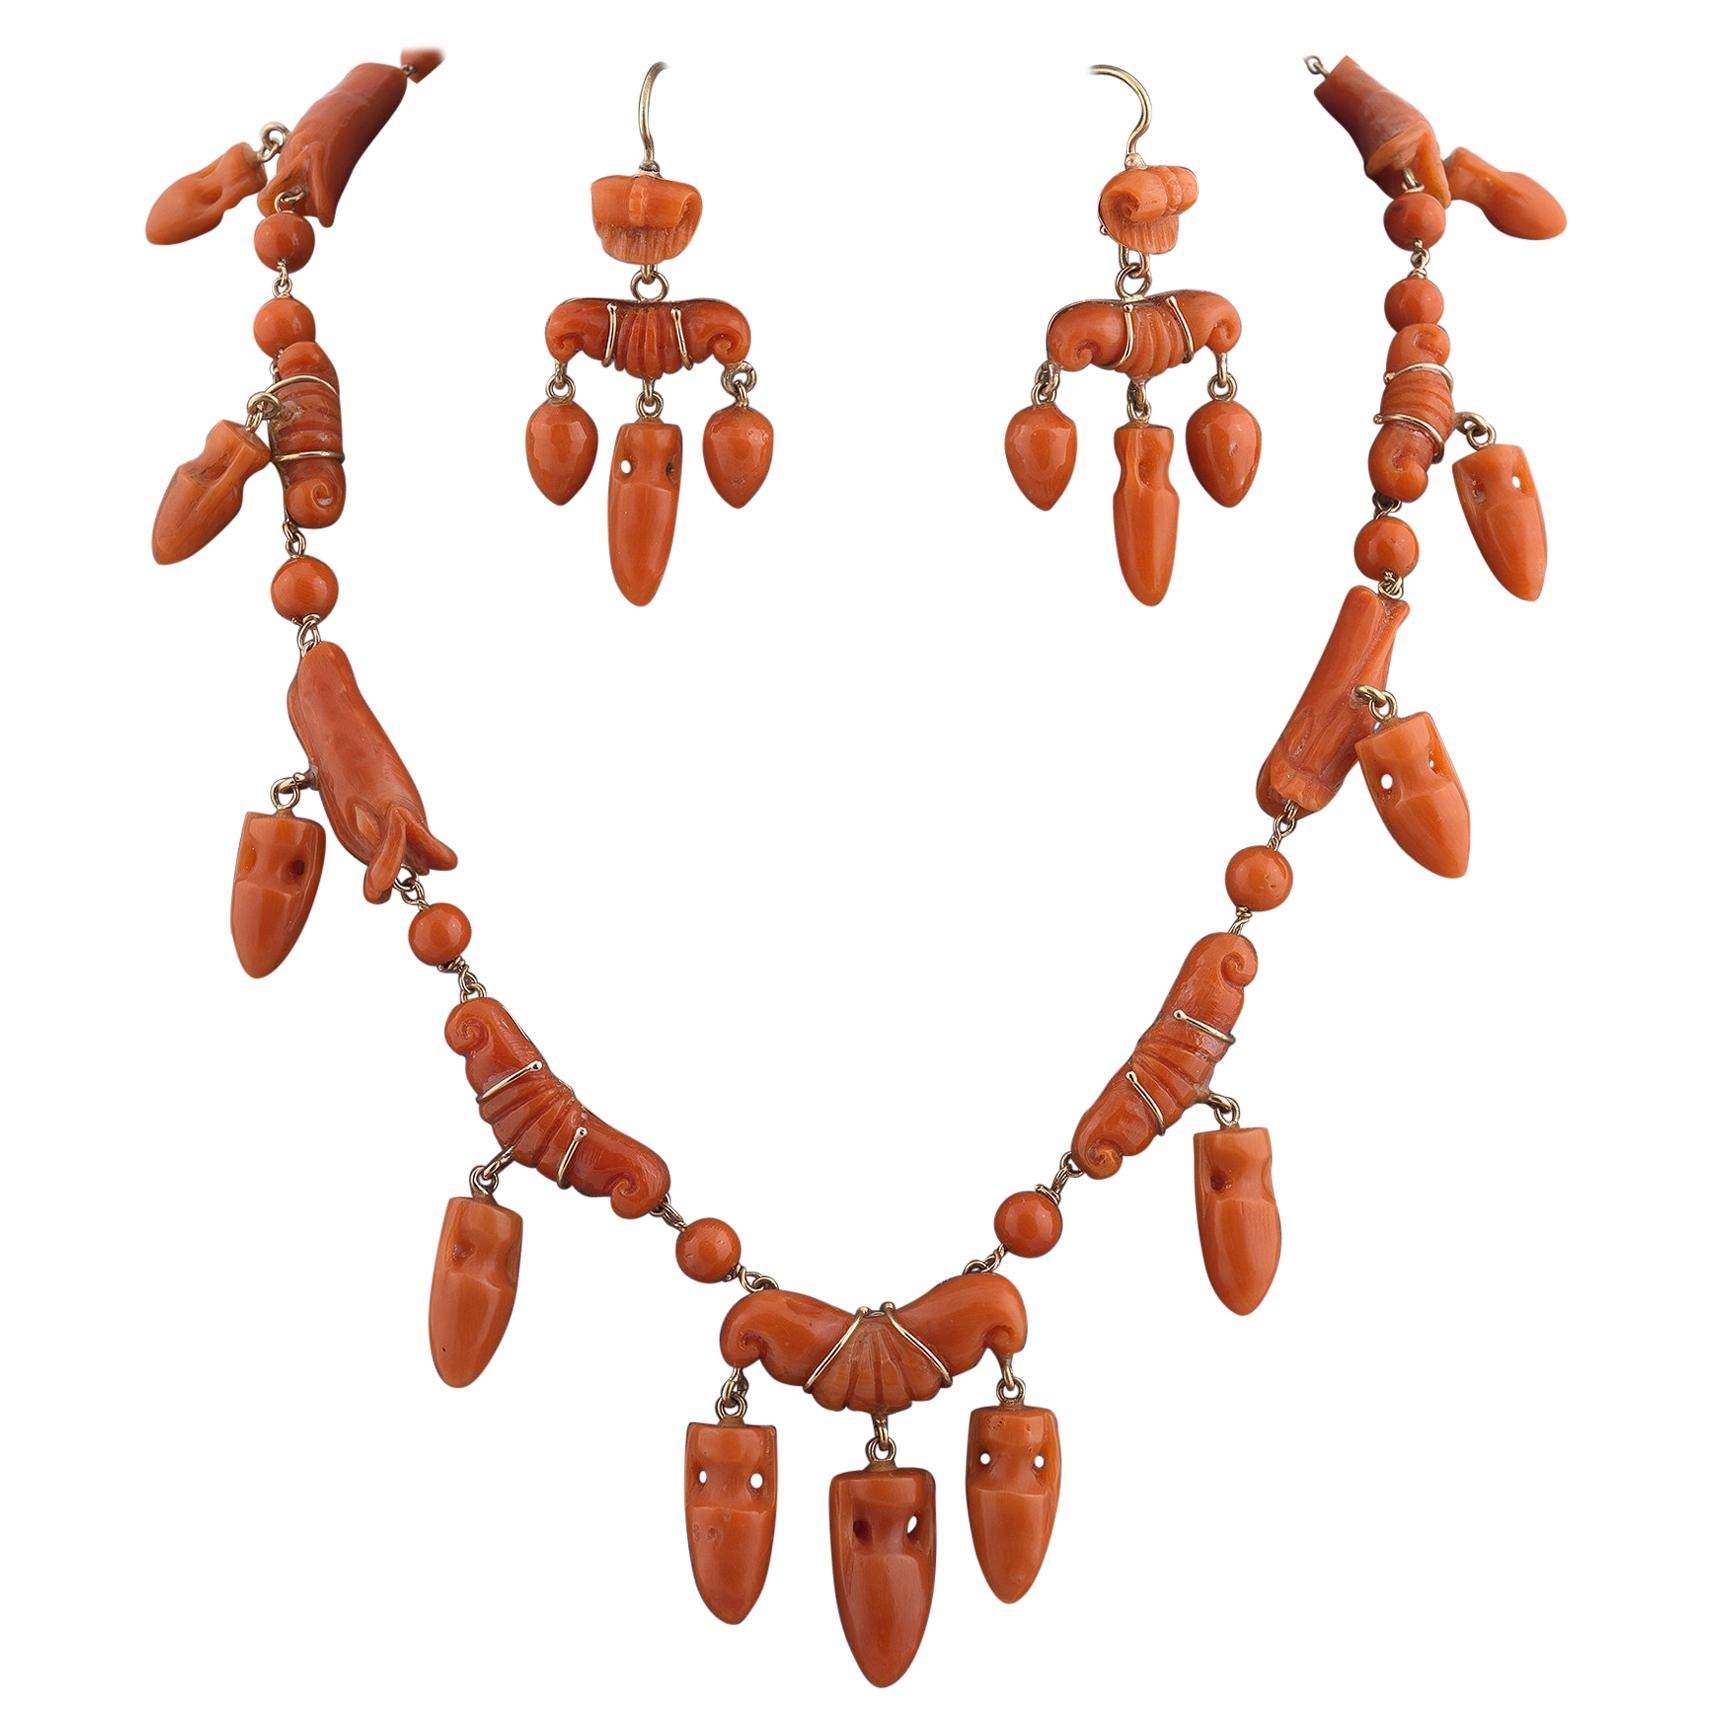 Antique Carved Necklace and Earrings, circa 1860